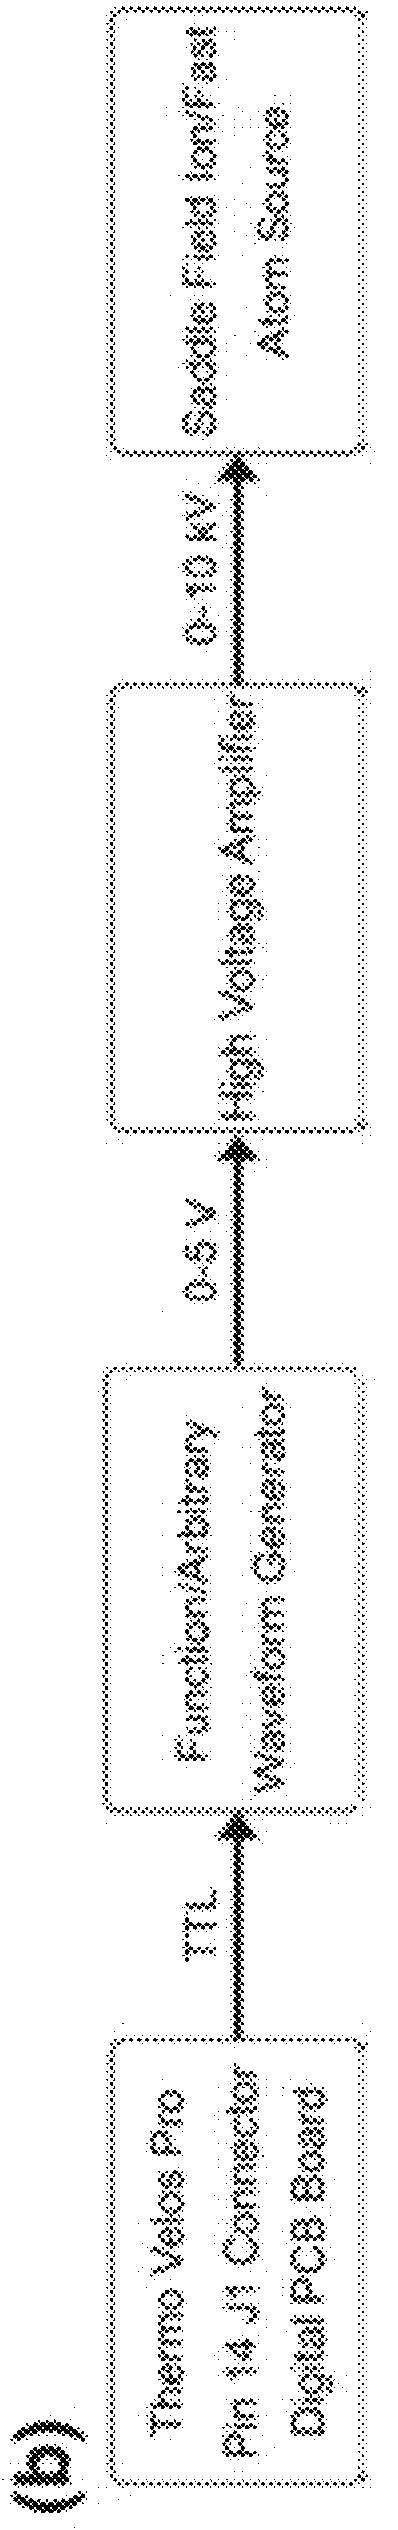 Method and device for mass spectrometric analysis of biomolecules using charge transfer dissociation (CTD)